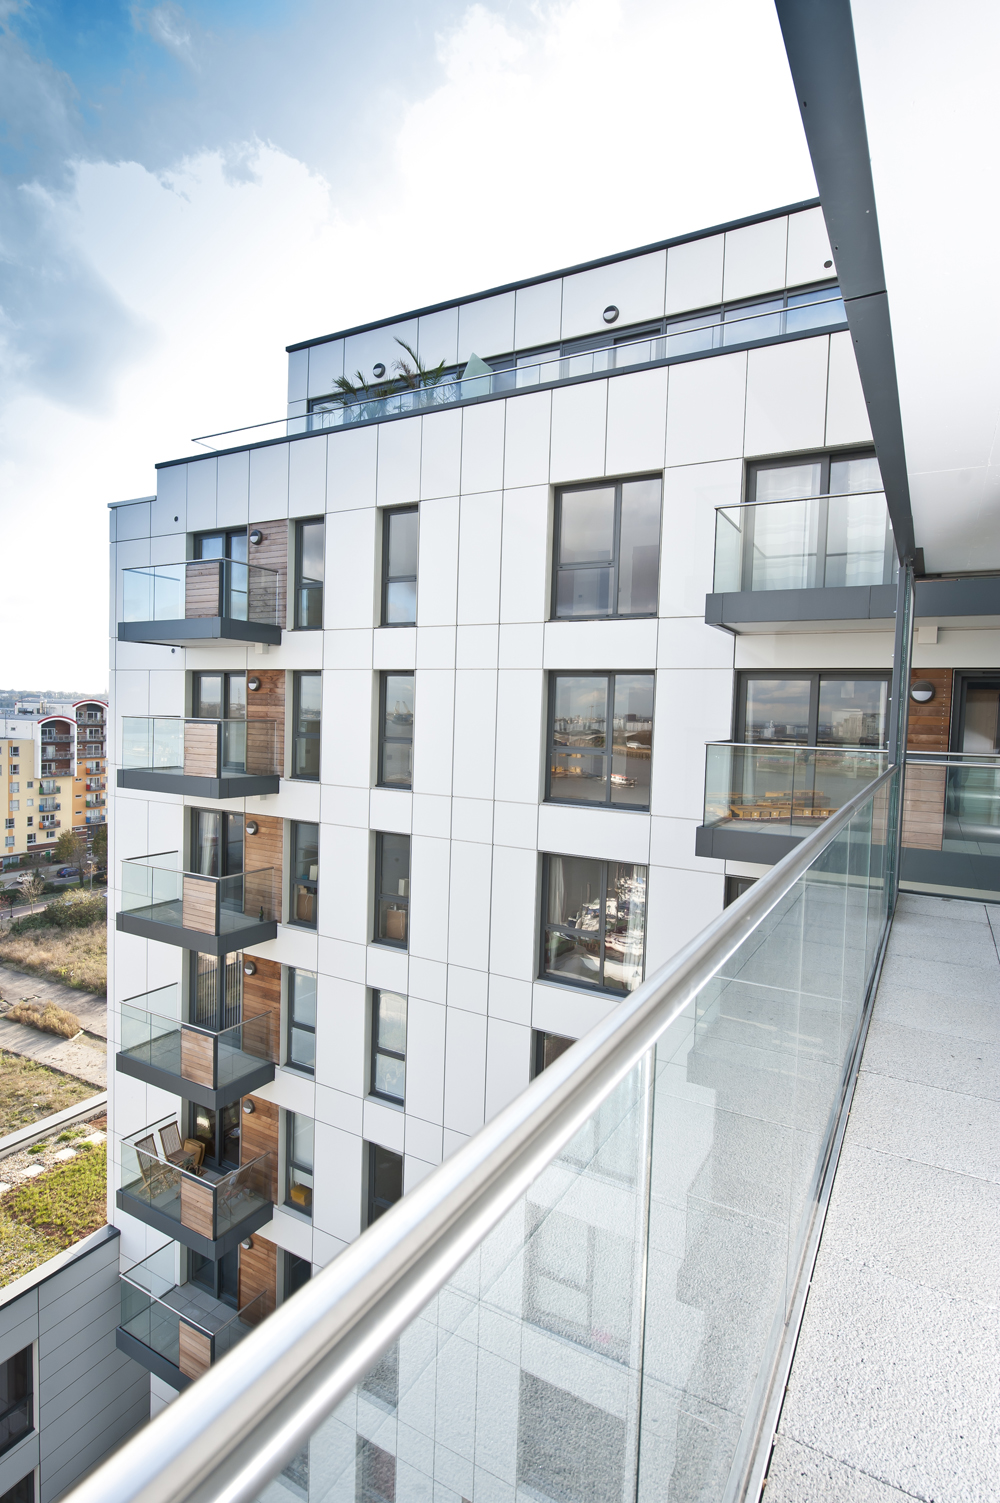 Specification considerations for glass balustrades and balconies